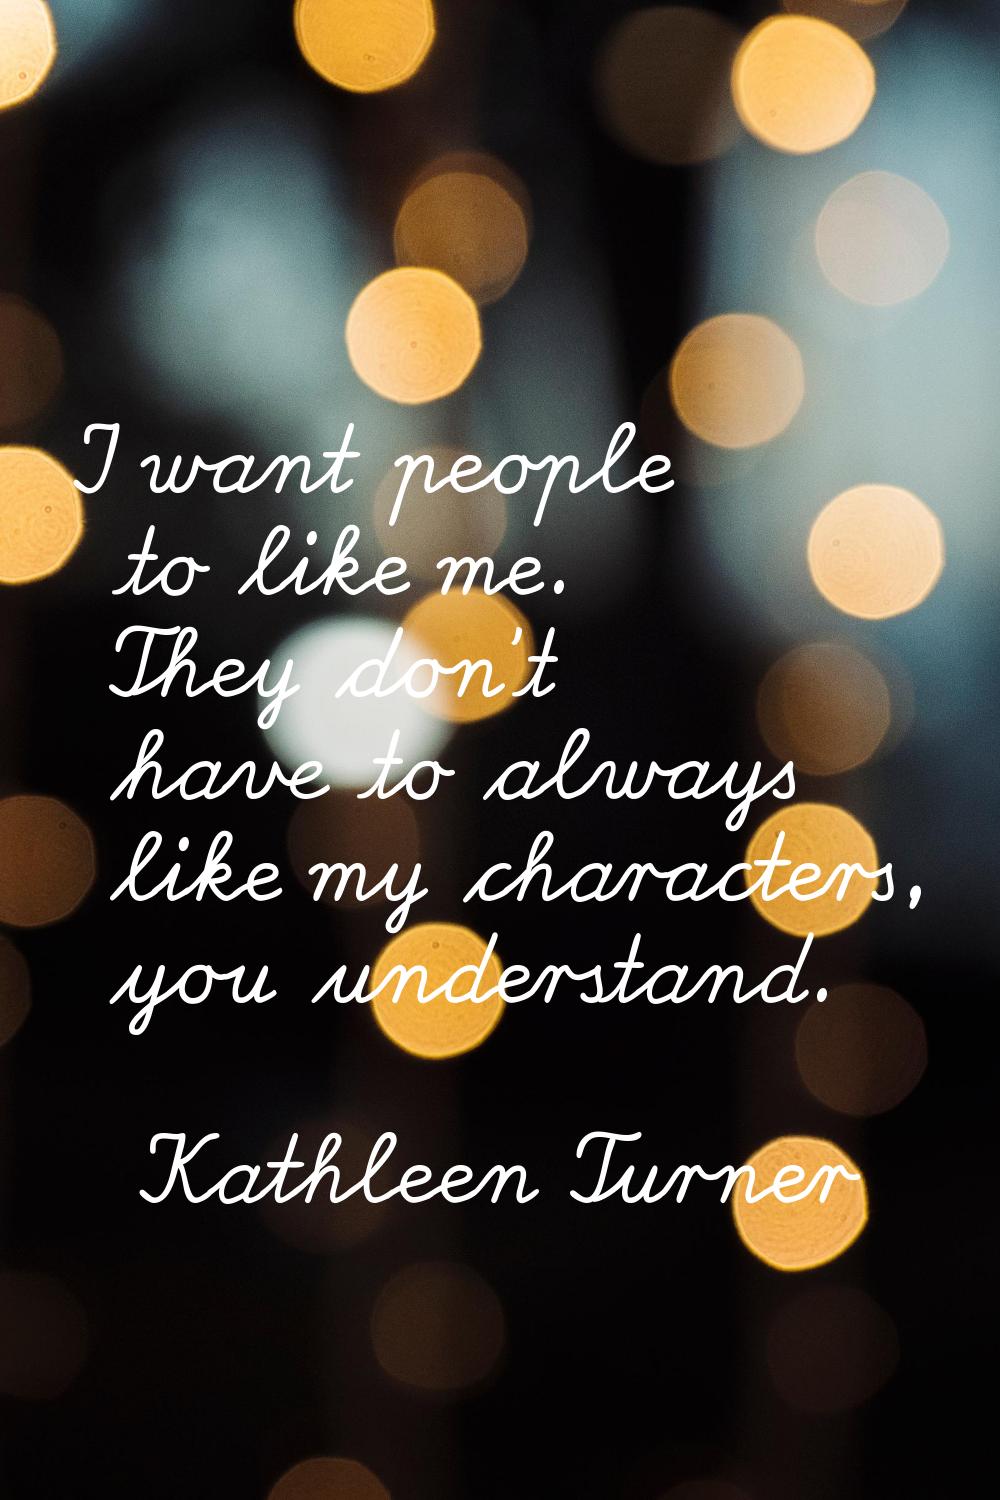 I want people to like me. They don't have to always like my characters, you understand.